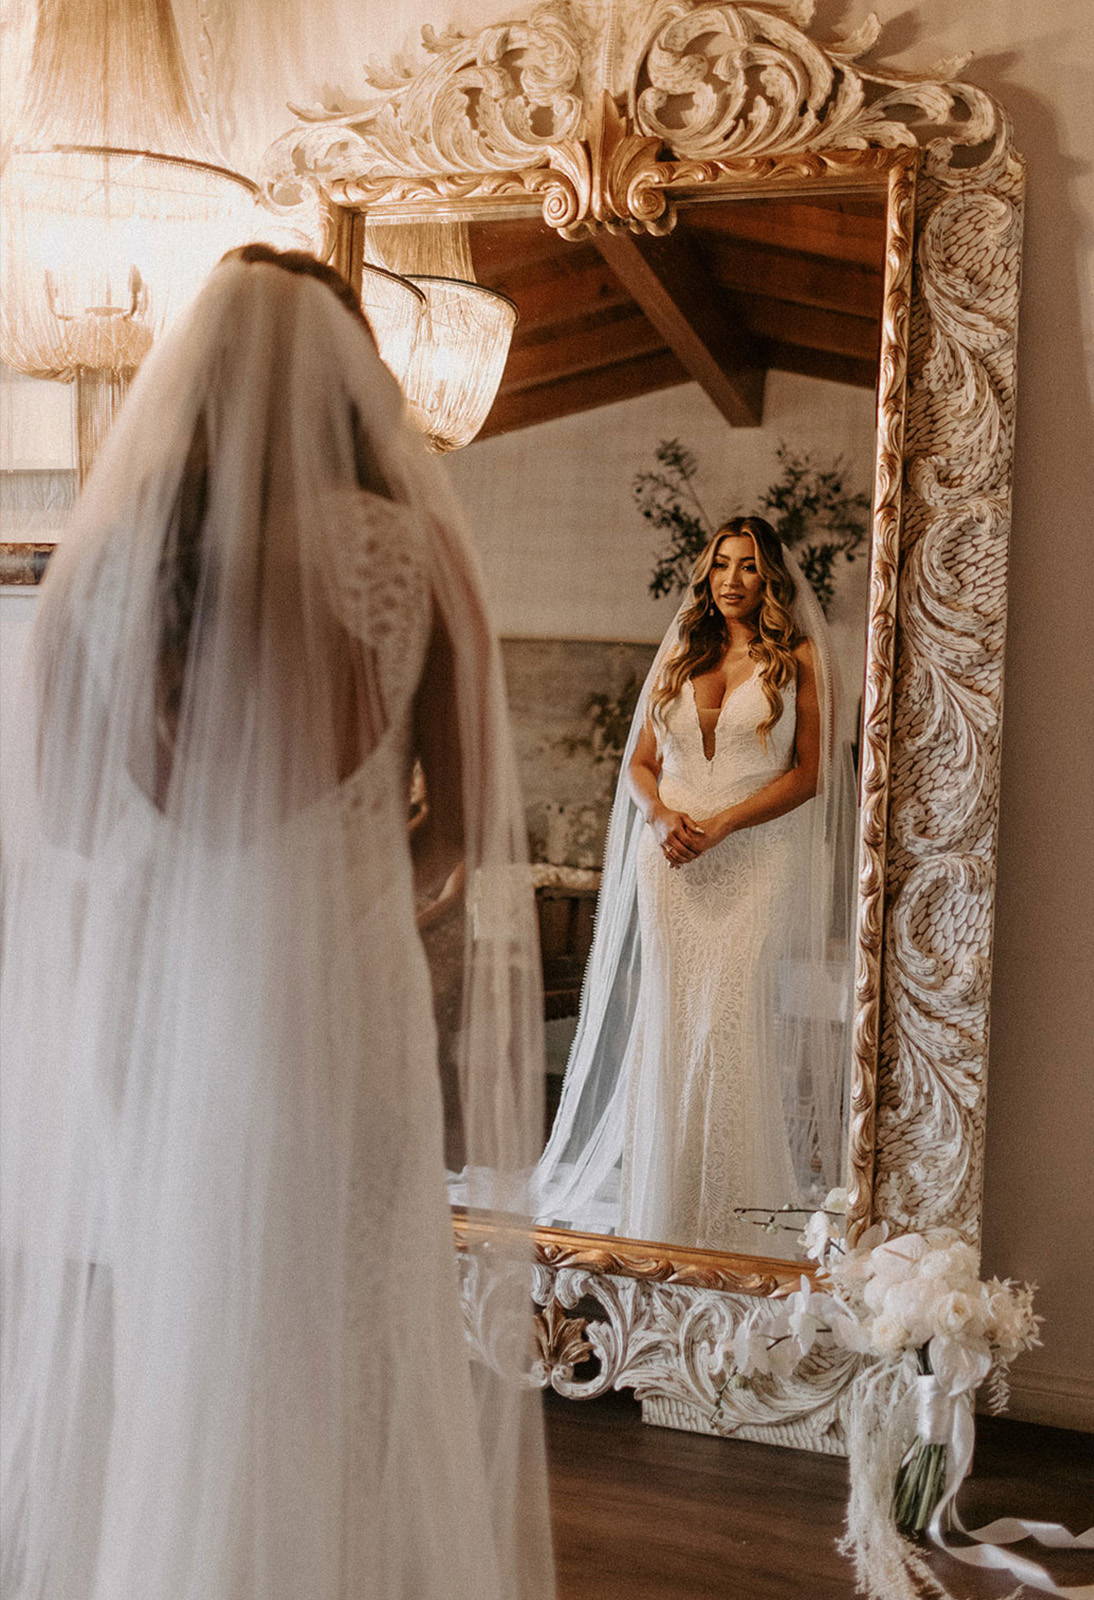 Bride looking in mirror at Chelo Gown and Veil